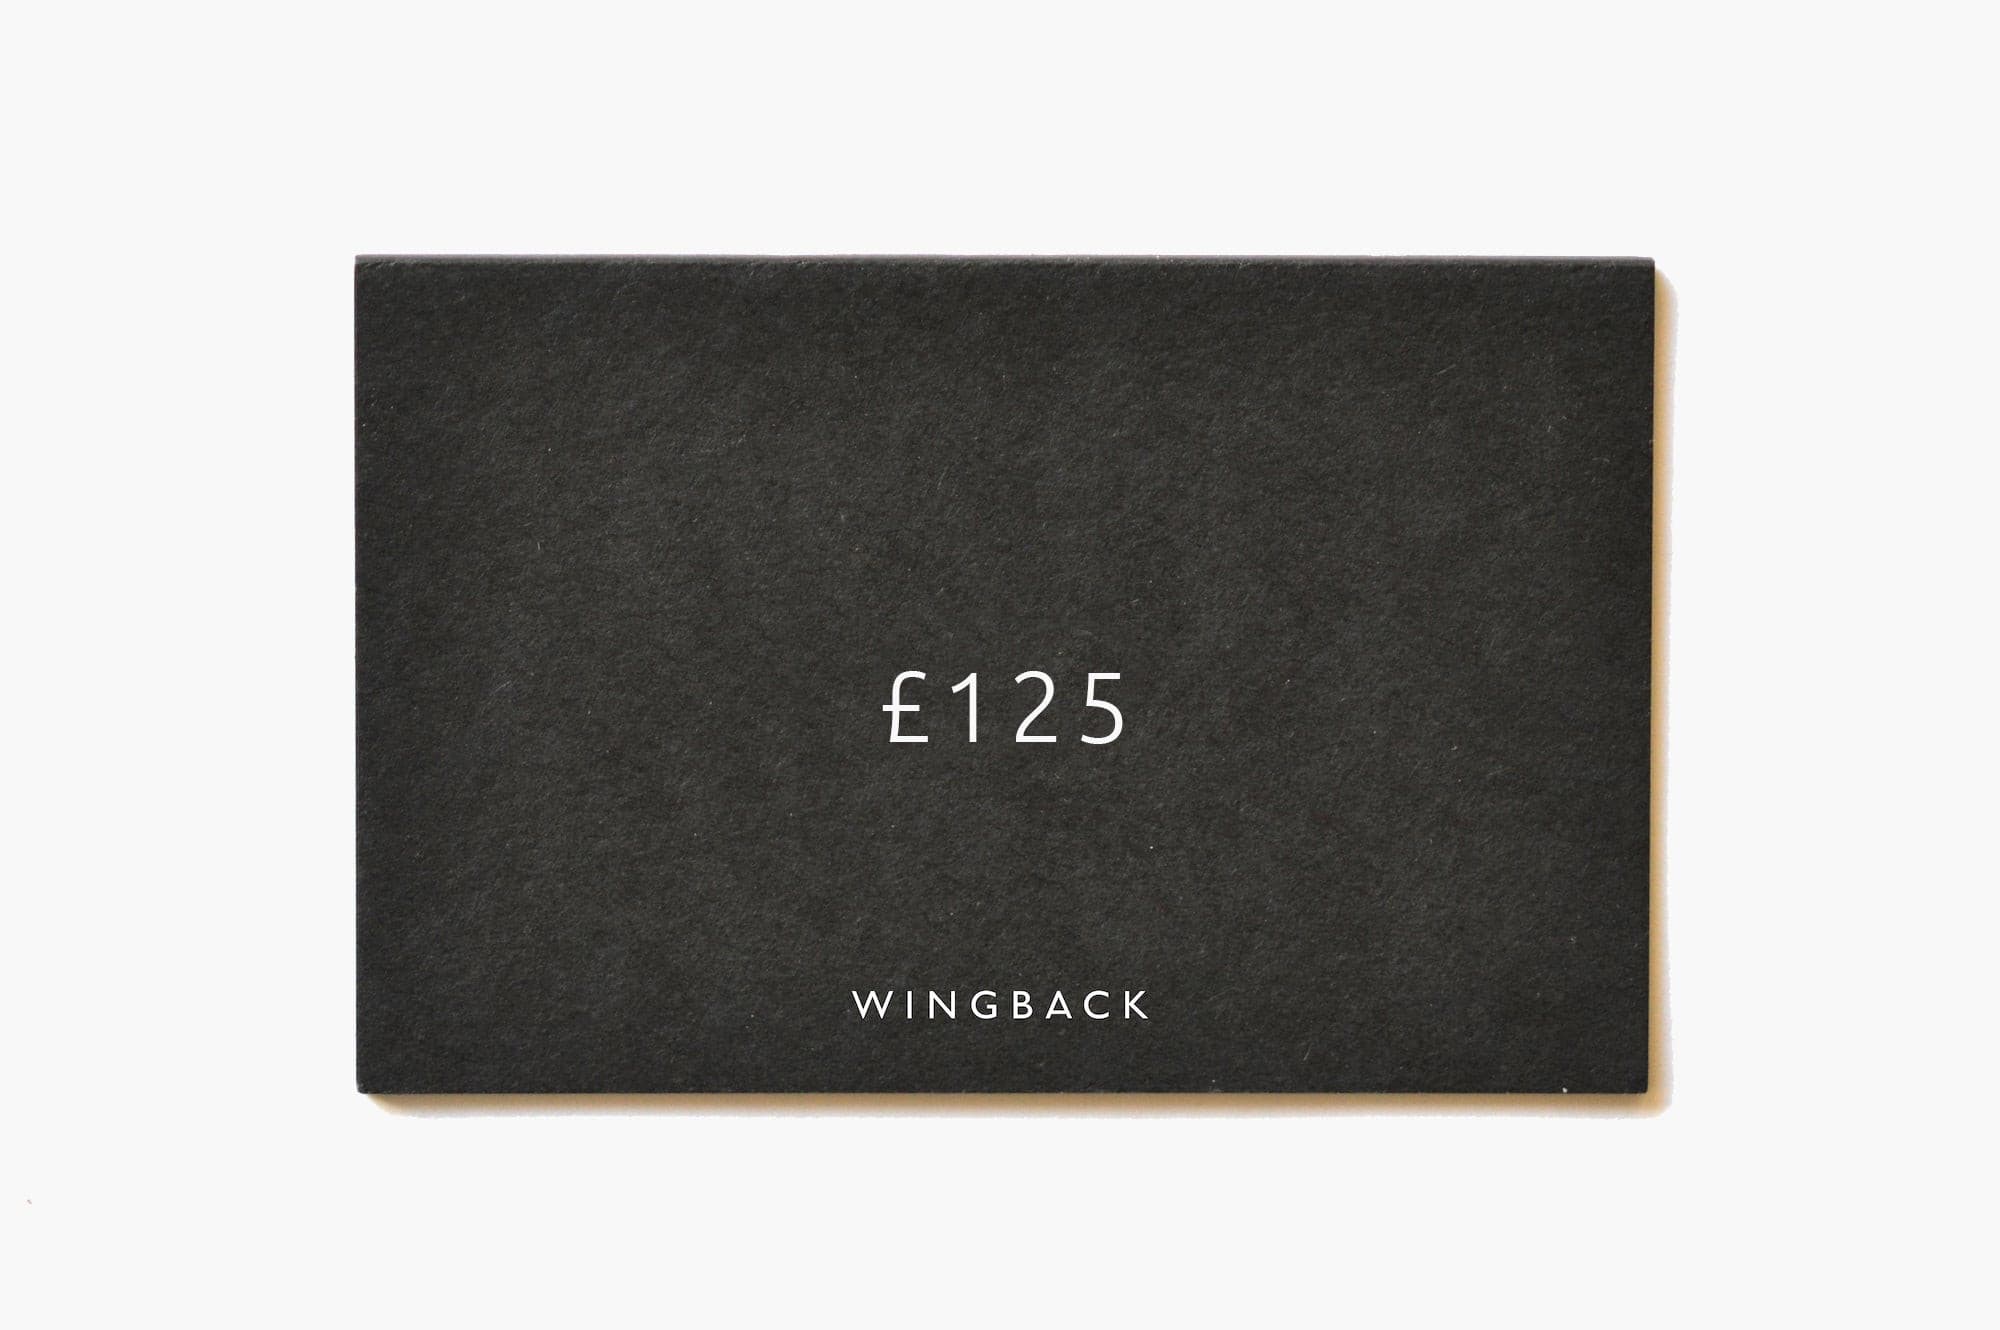 £100+ Gift Card made in England by Wingback.